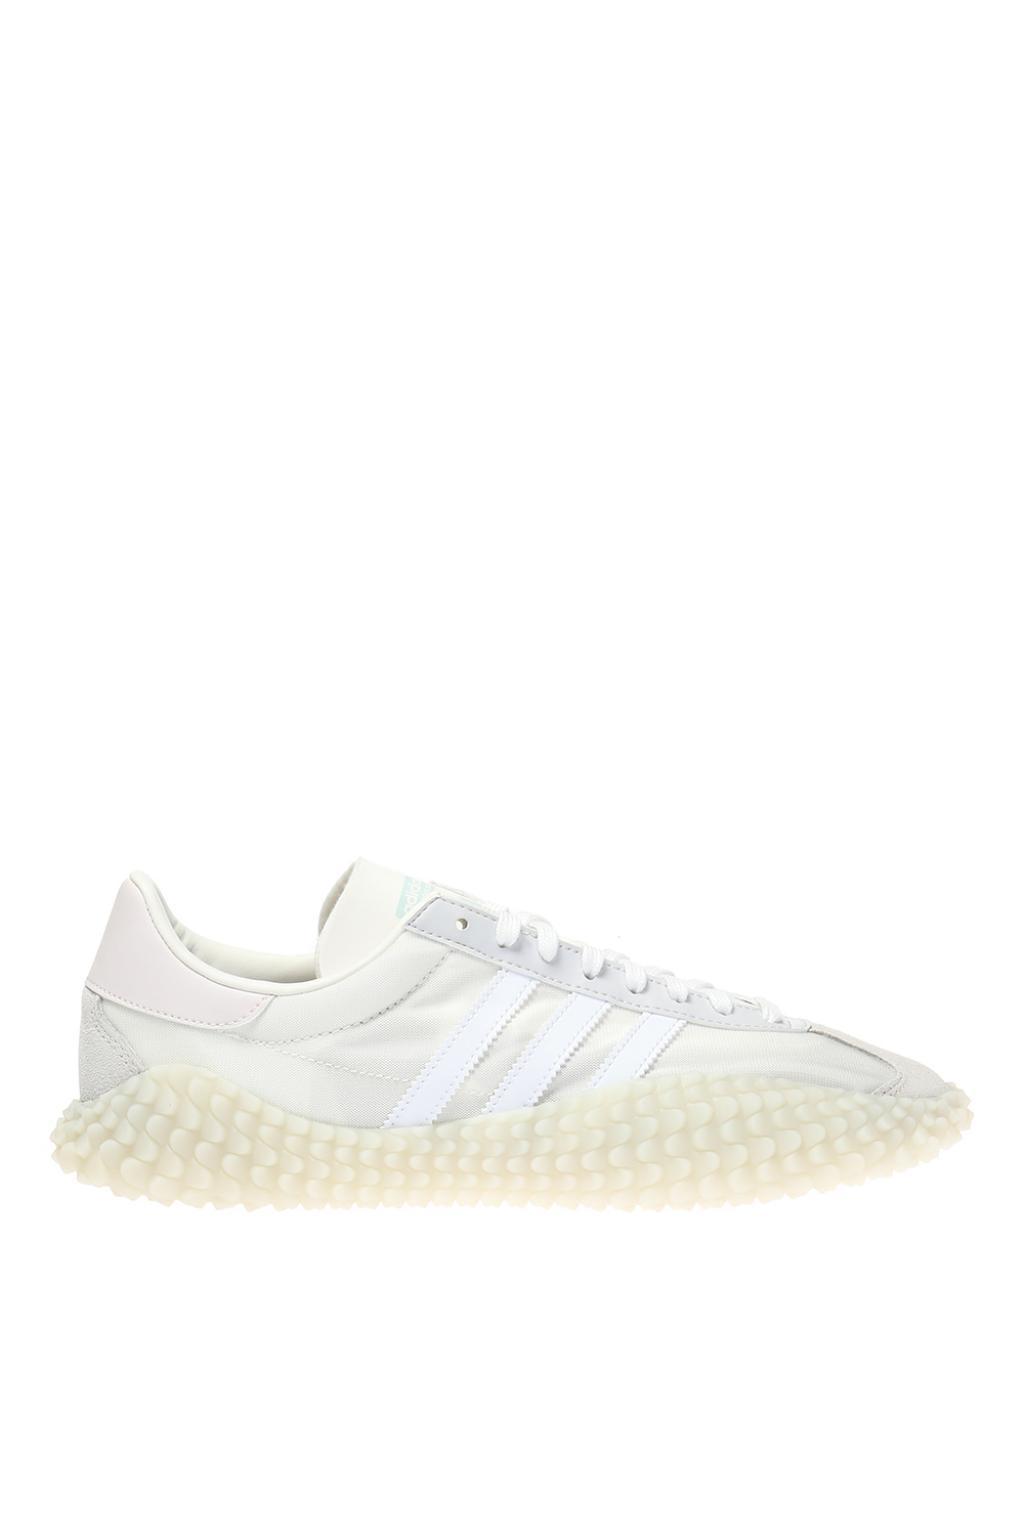 adidas Originals Lace 'country X Kamanda' Sneakers in White for Men - Lyst